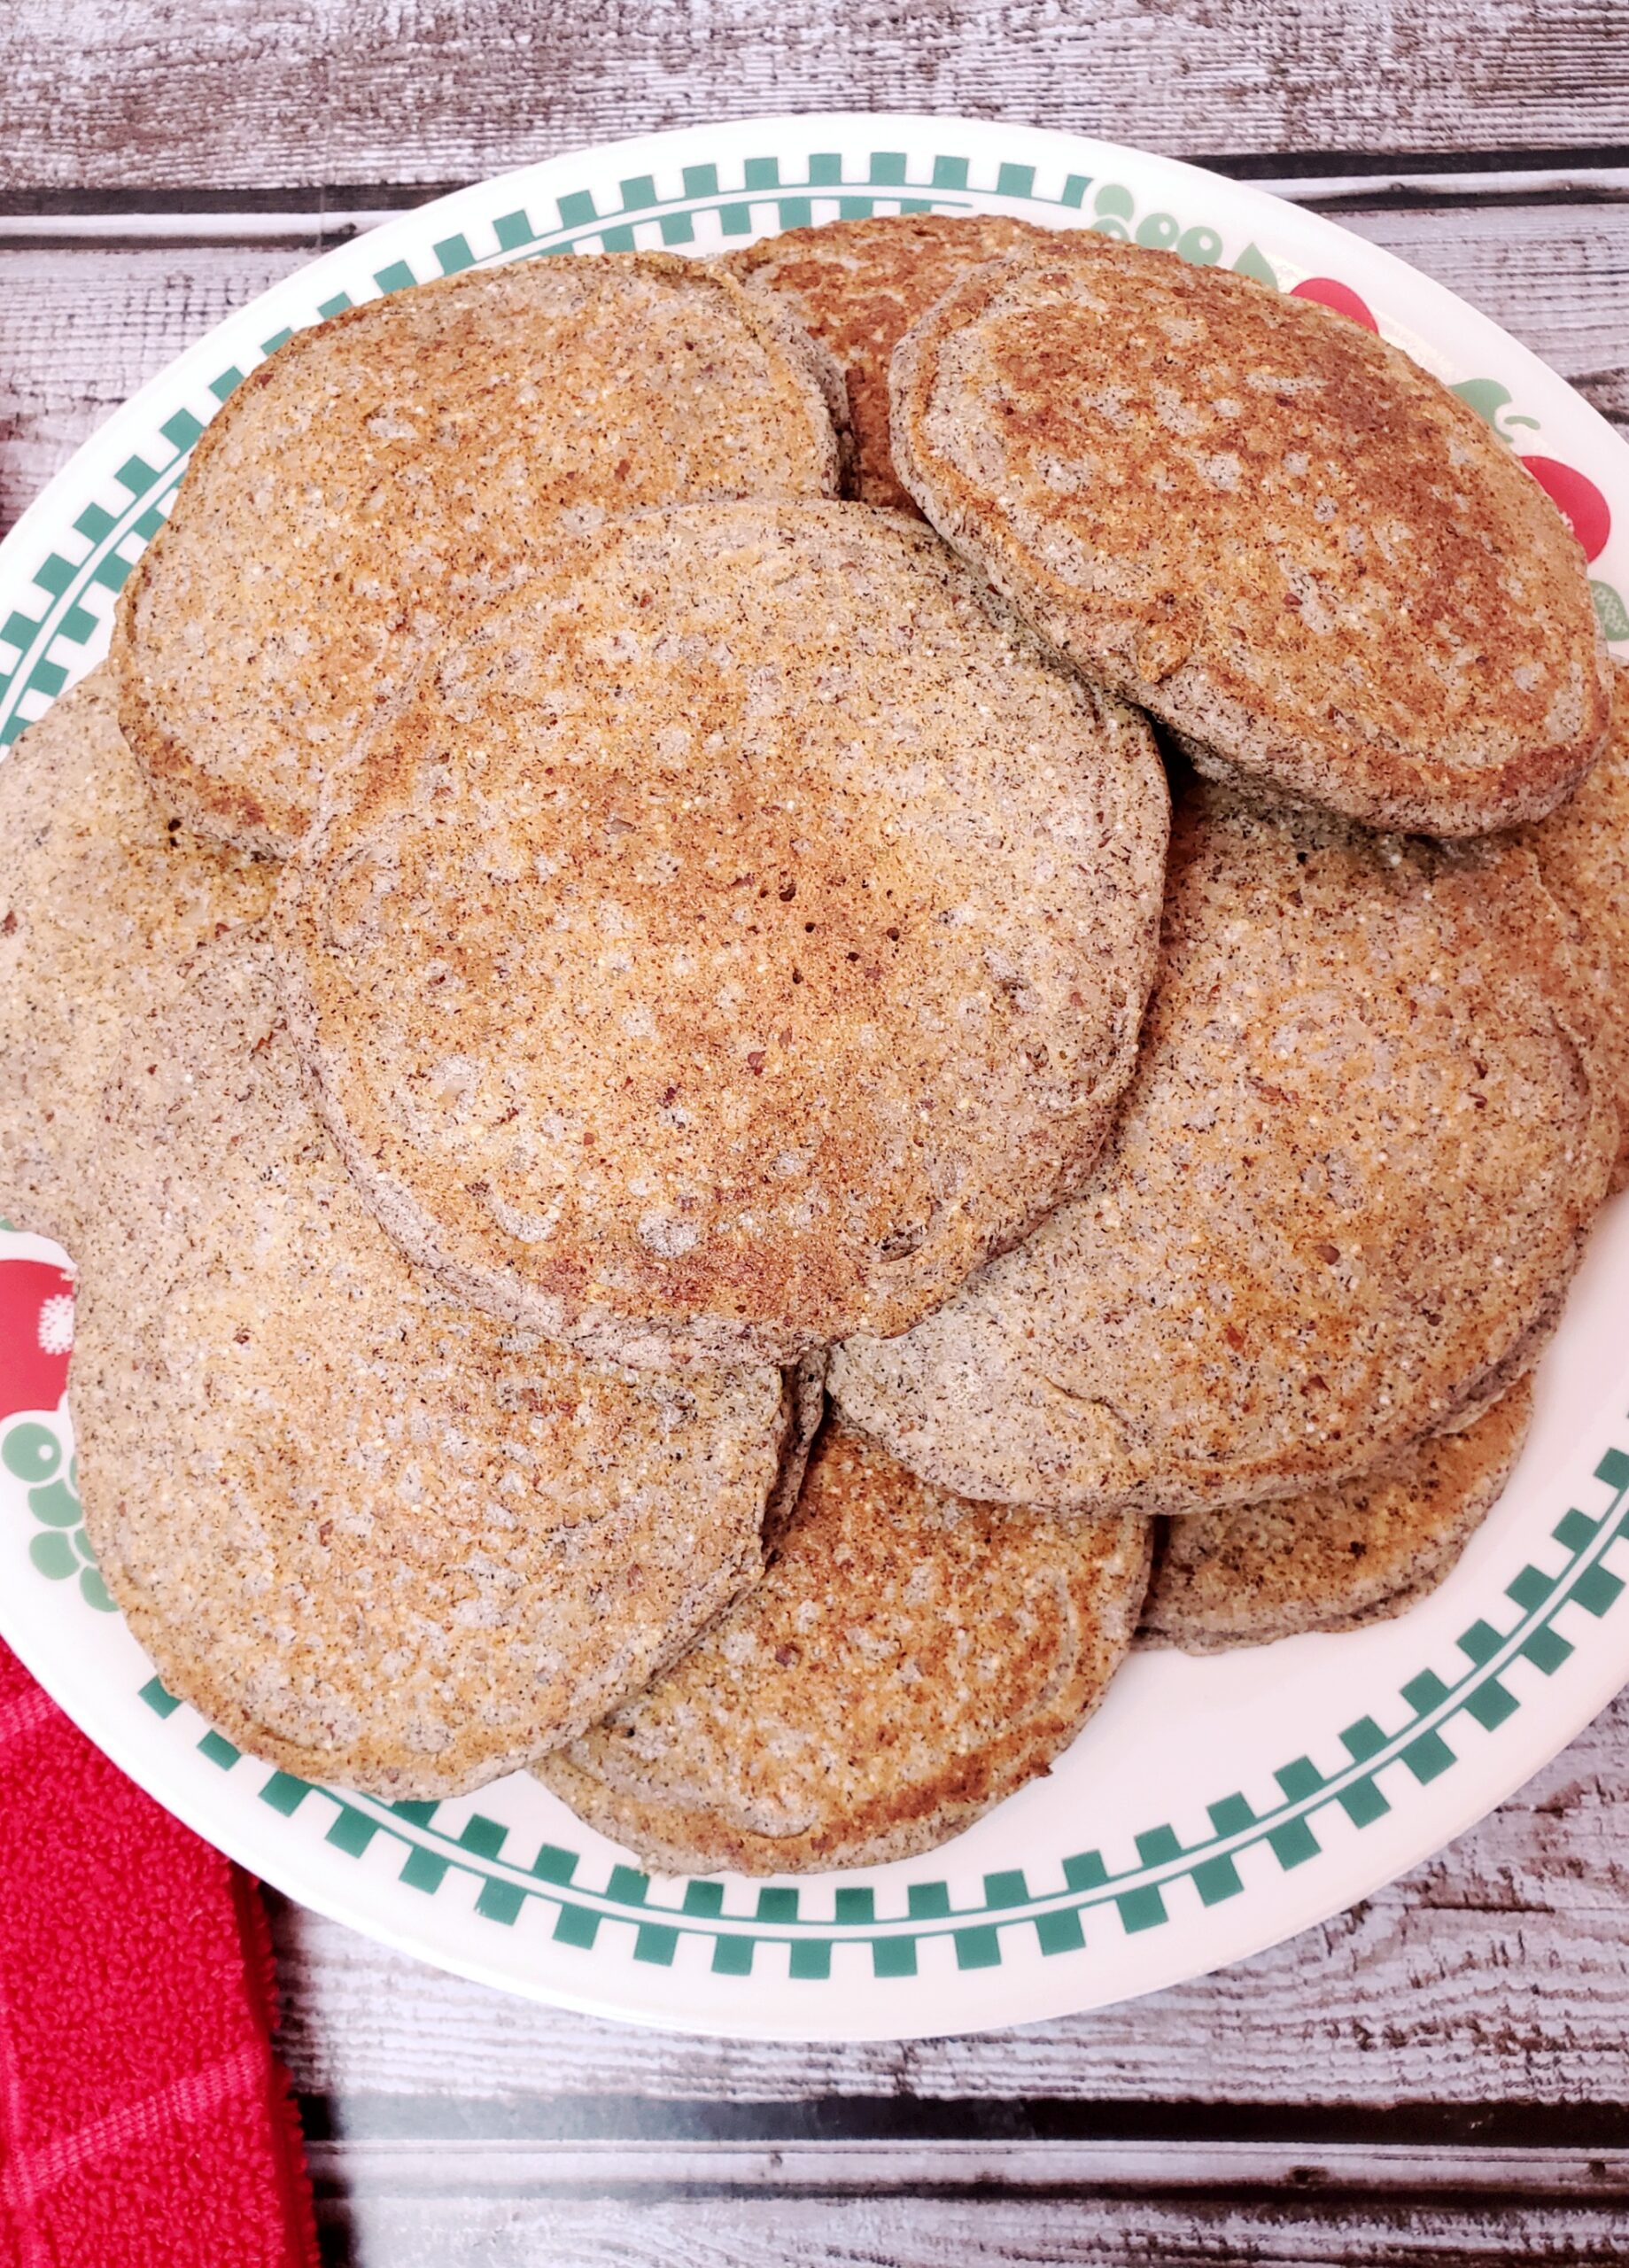 a pile of Buckwheat Almond Pancakes on a plate.